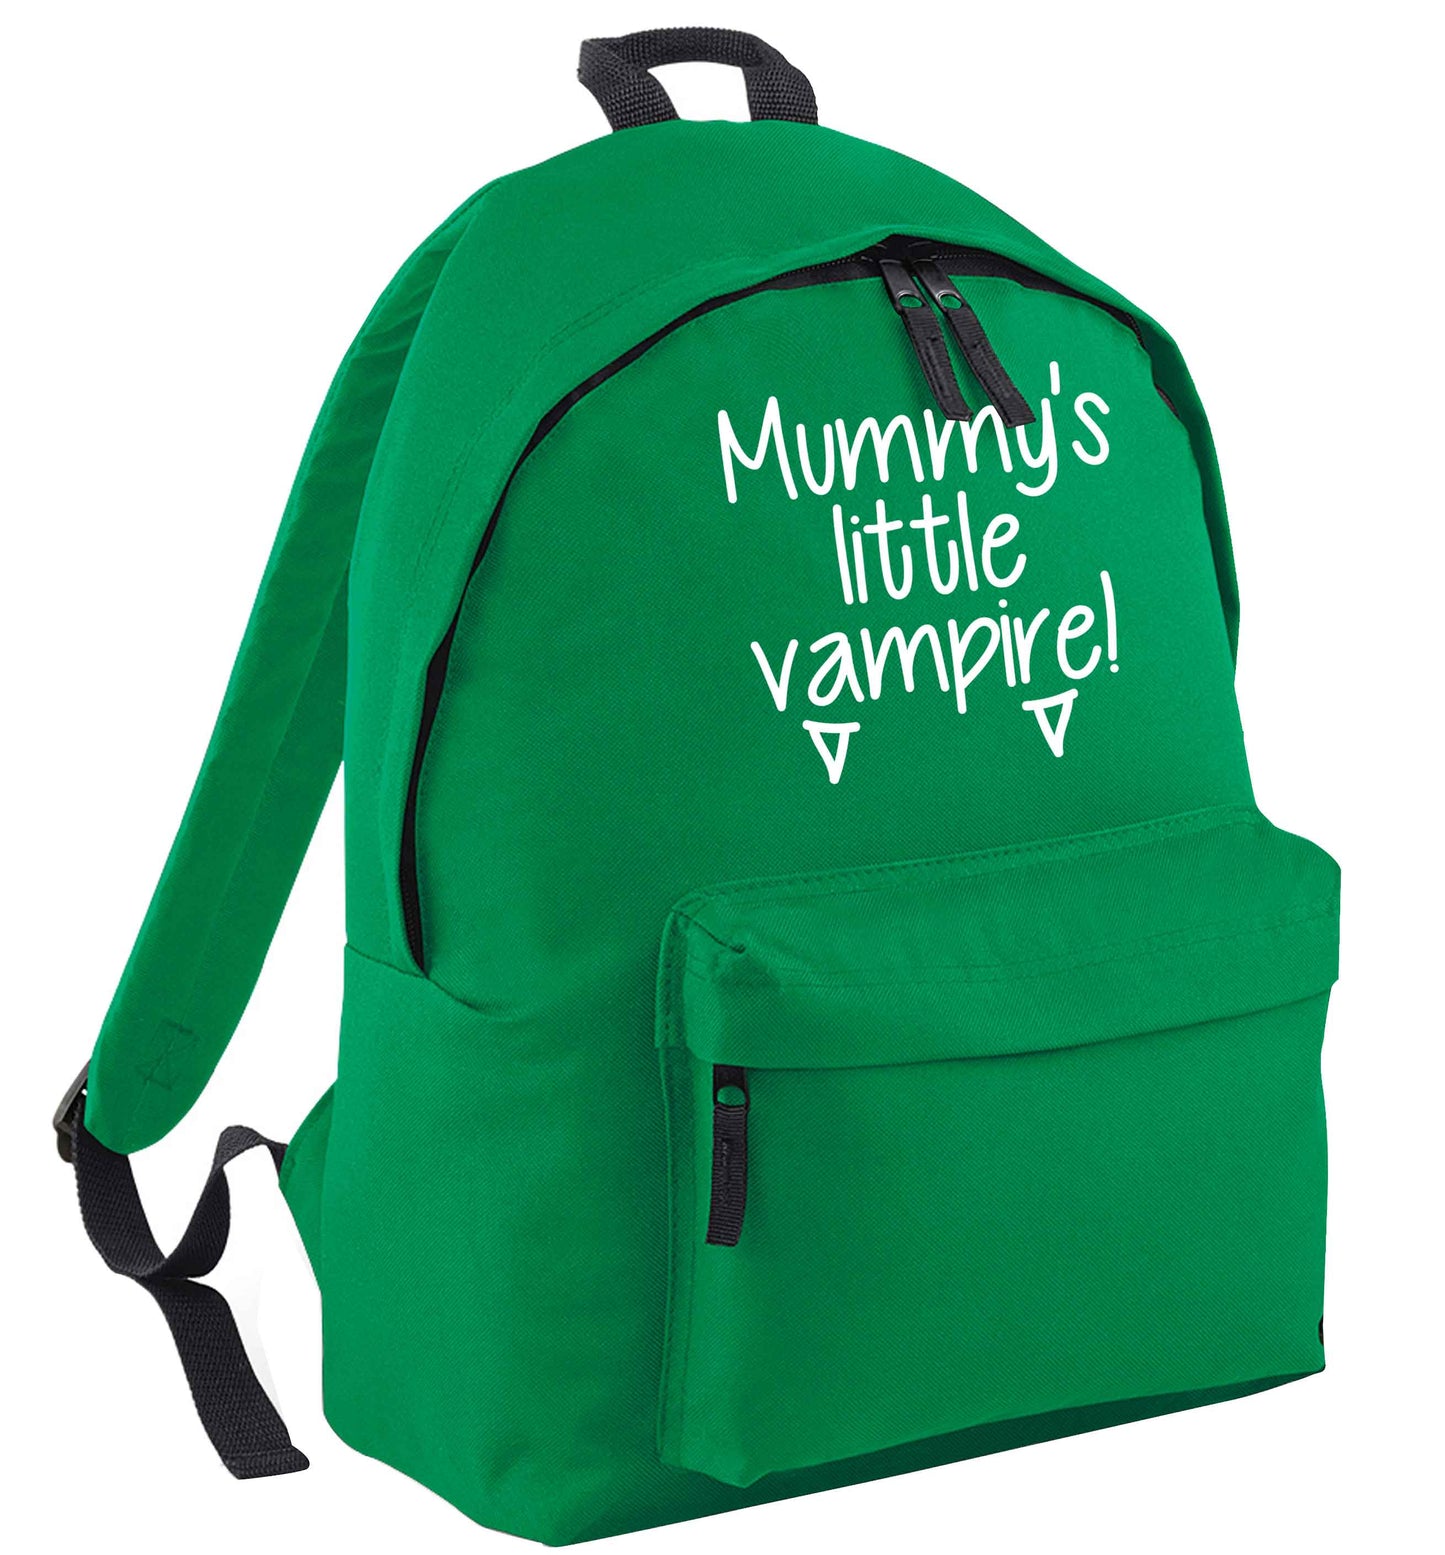 Mummy's little vampire green adults backpack